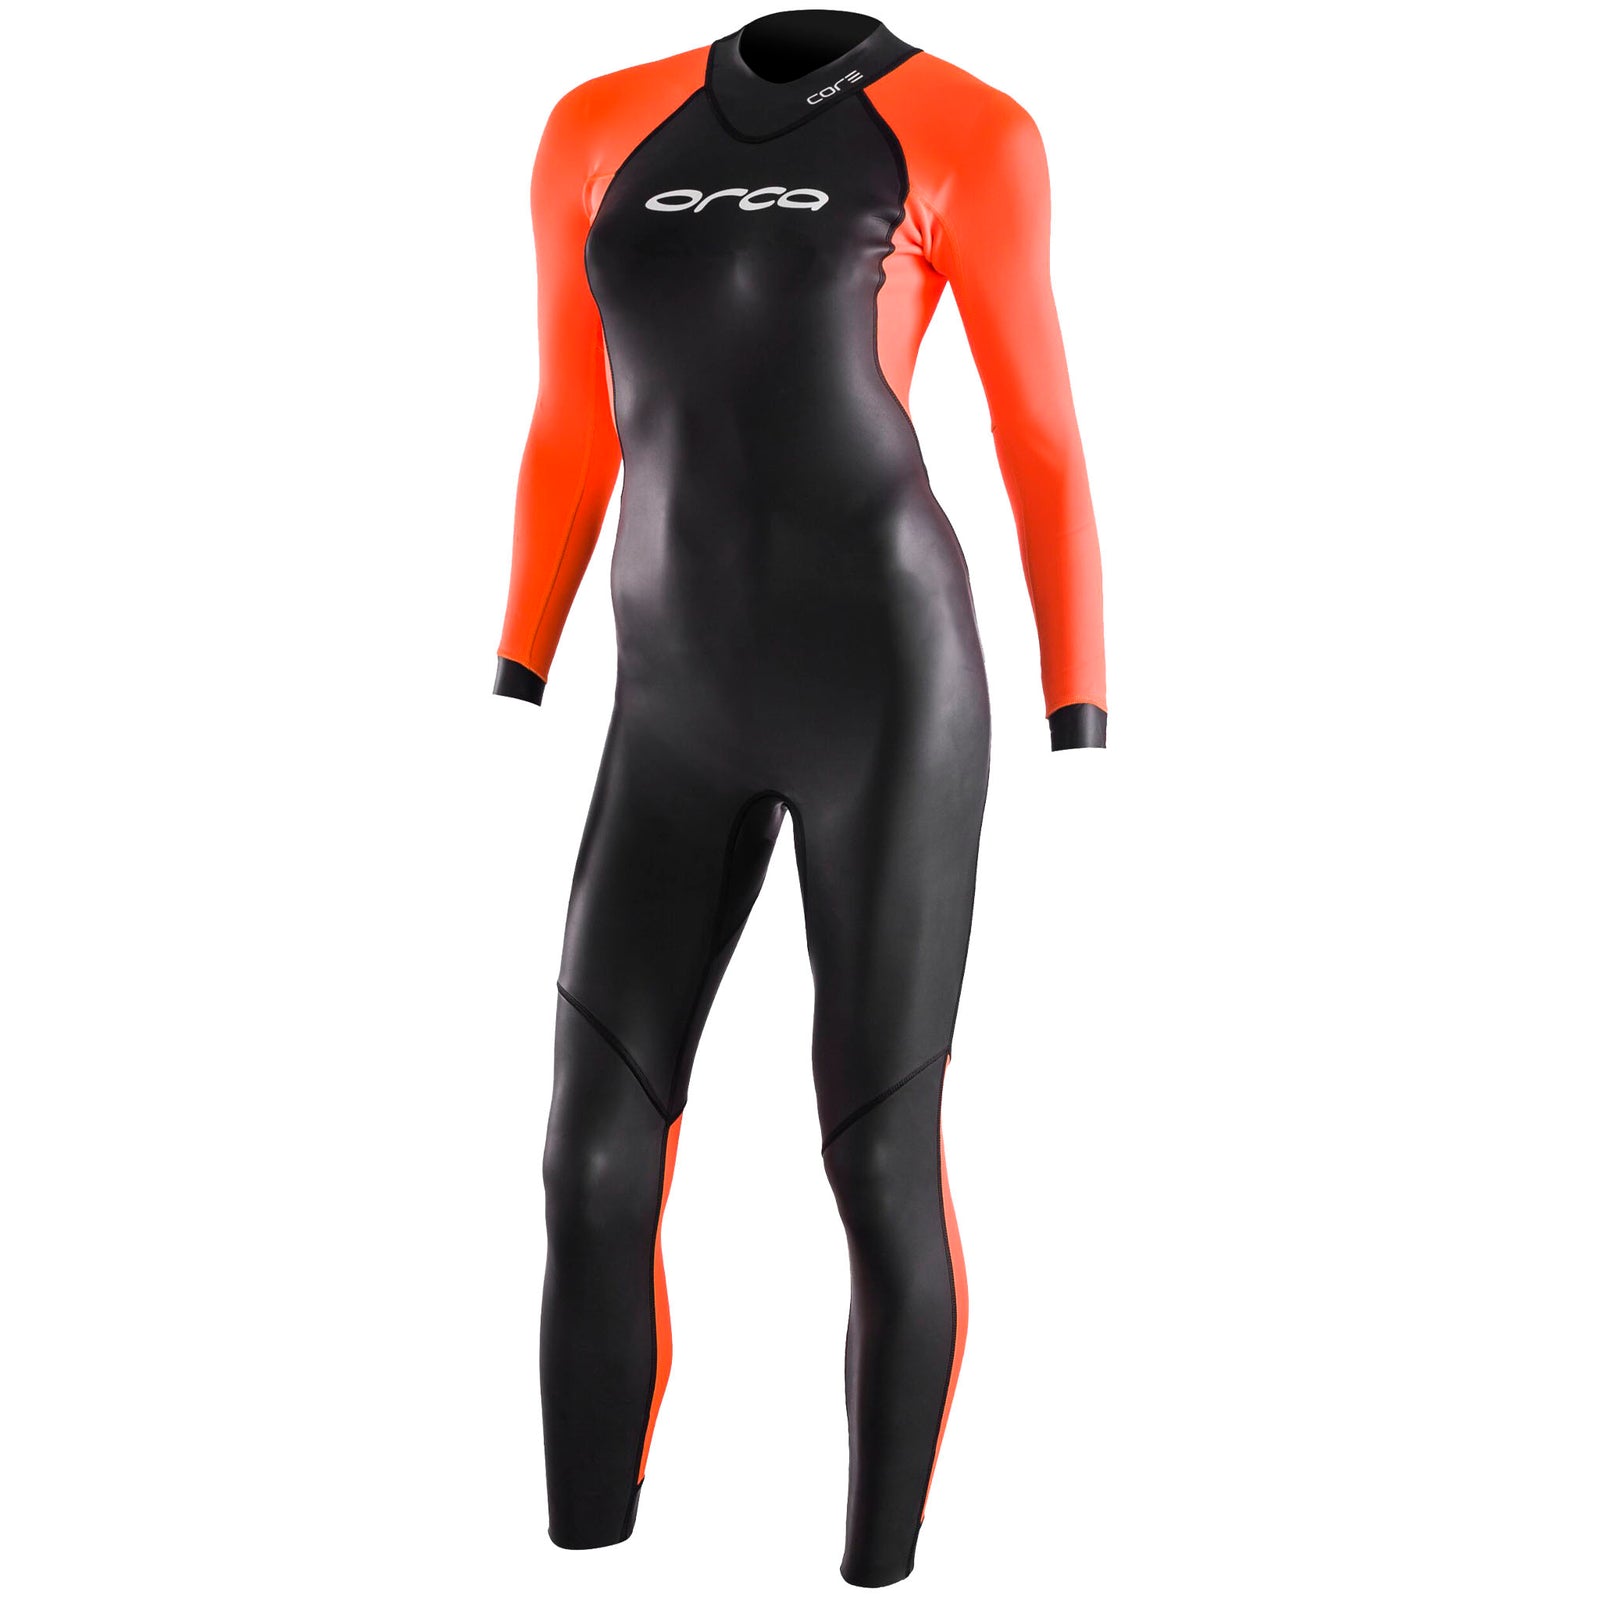 Watersports Warehouse UK | Scuba Diving, Wetsuits, Snorkelling & more